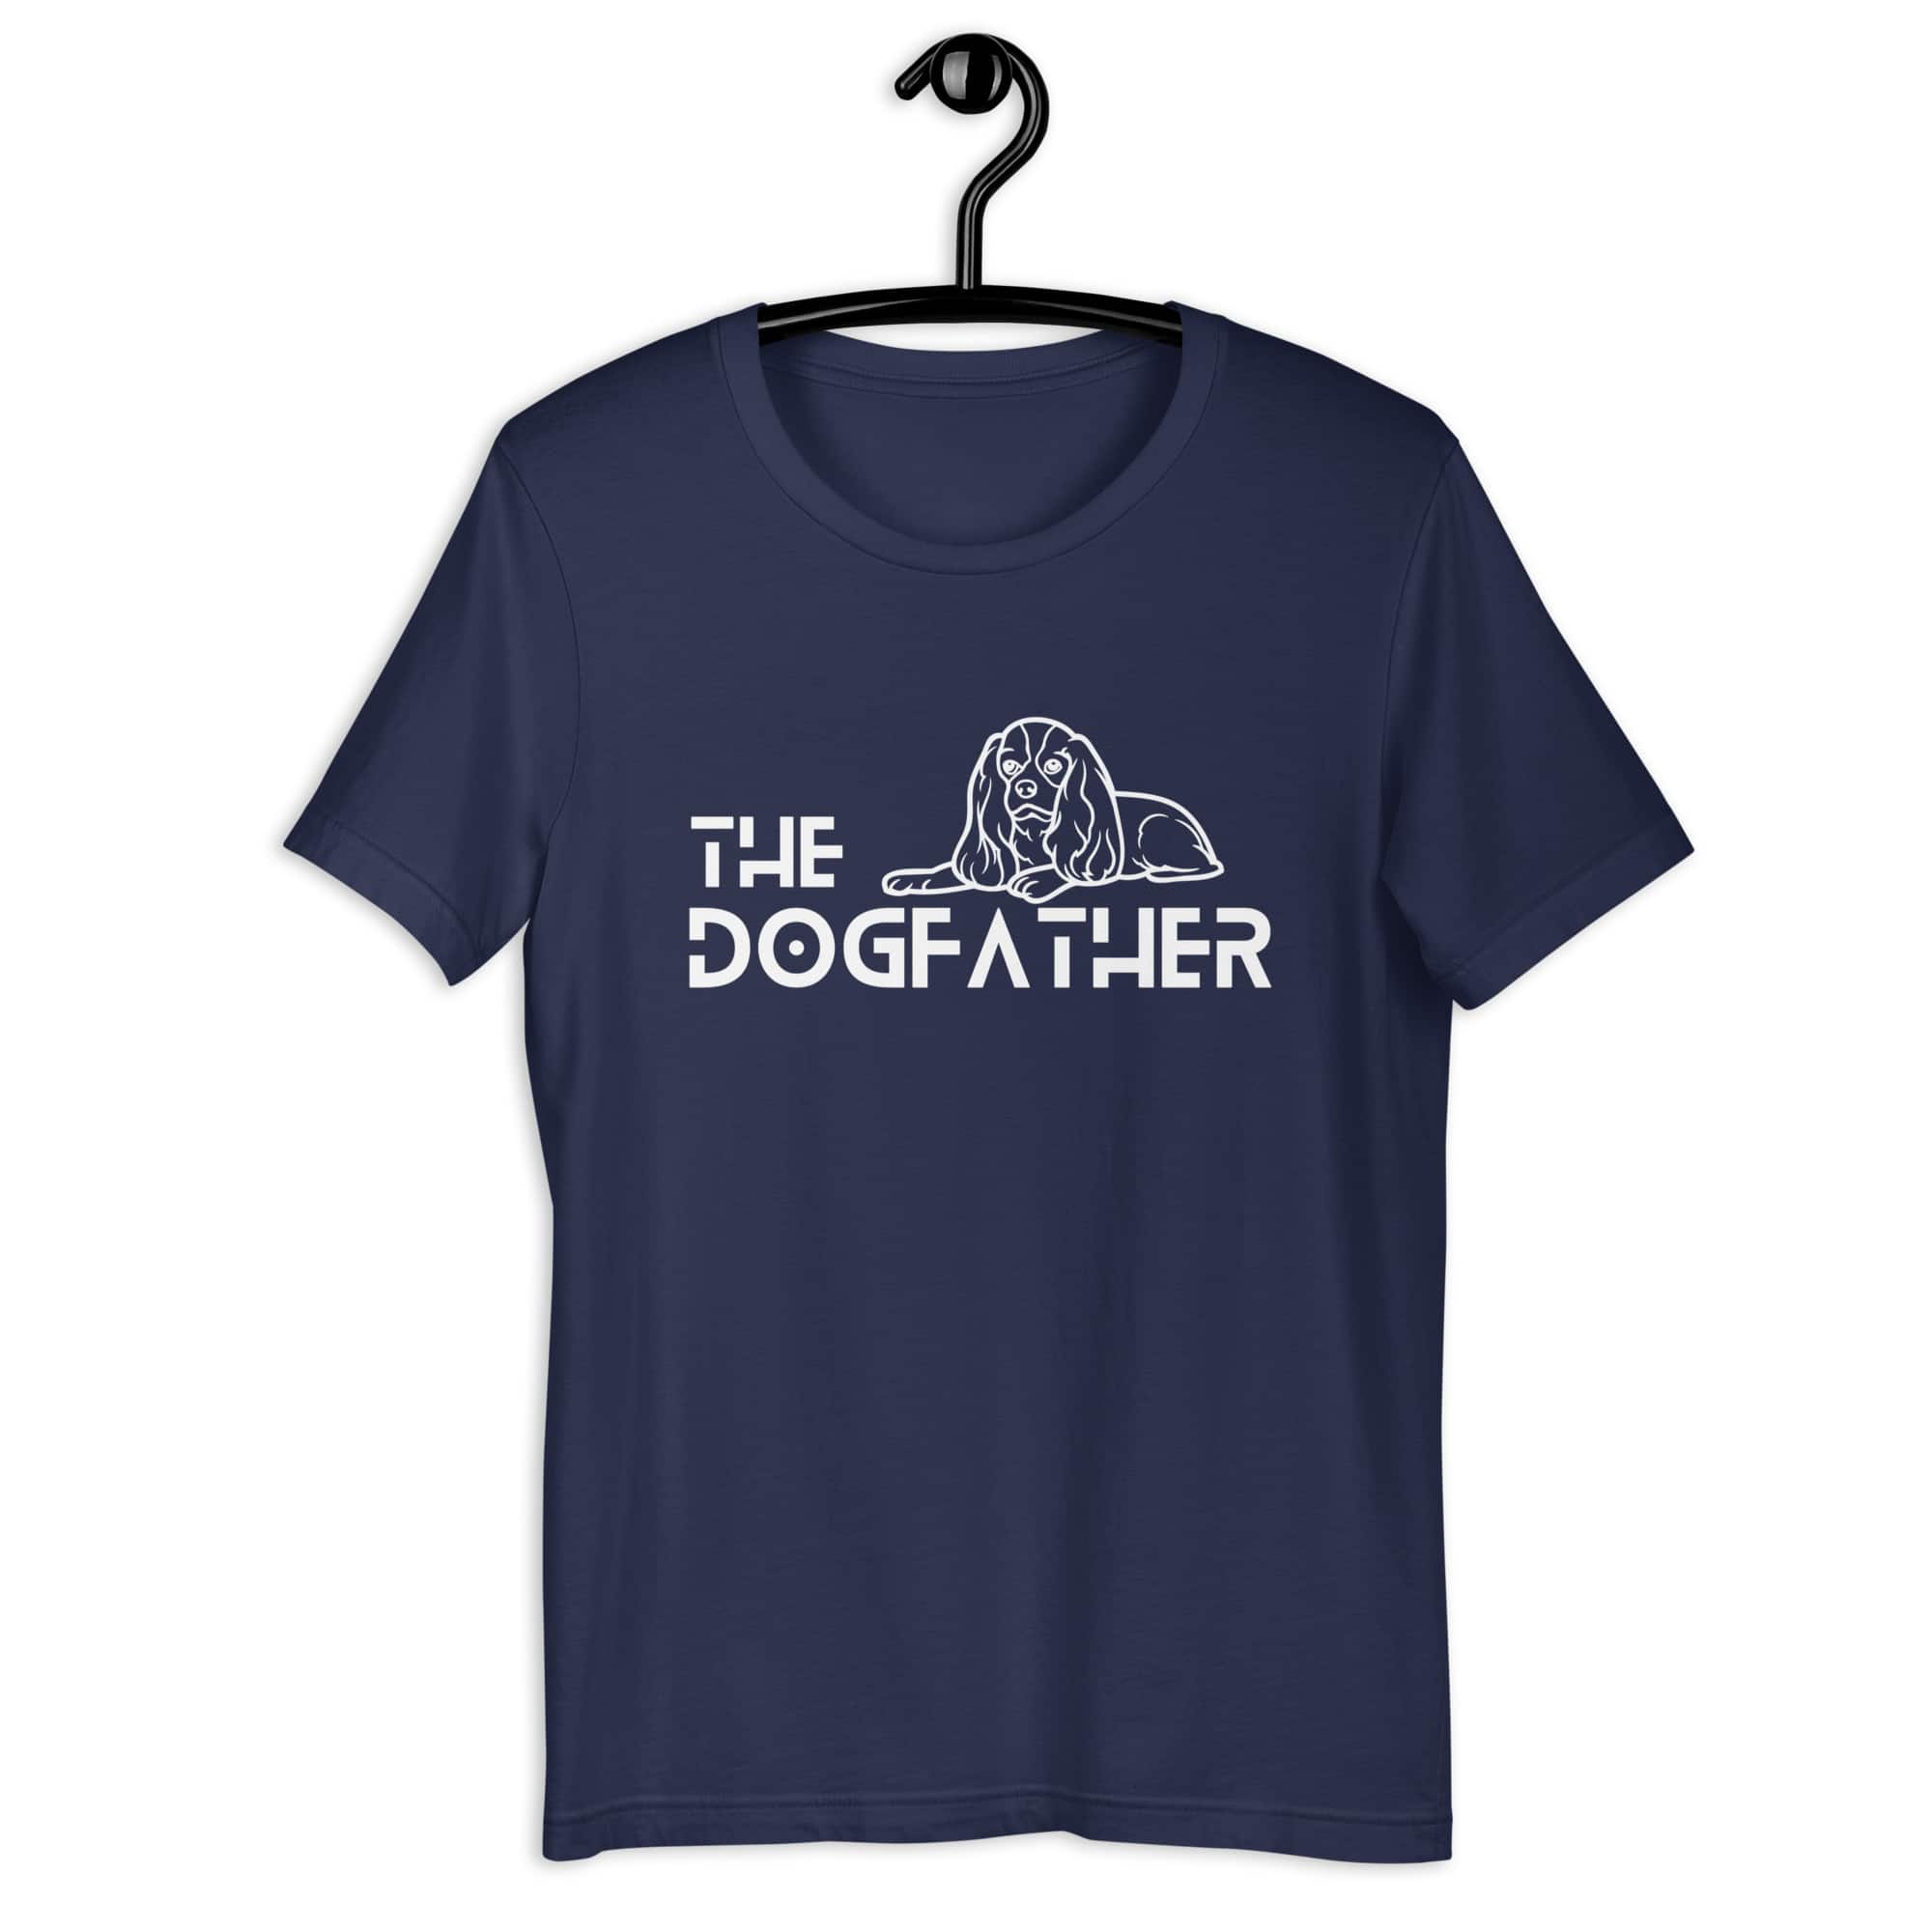 The Dogfather Hounds Unisex T-Shirt. Navy